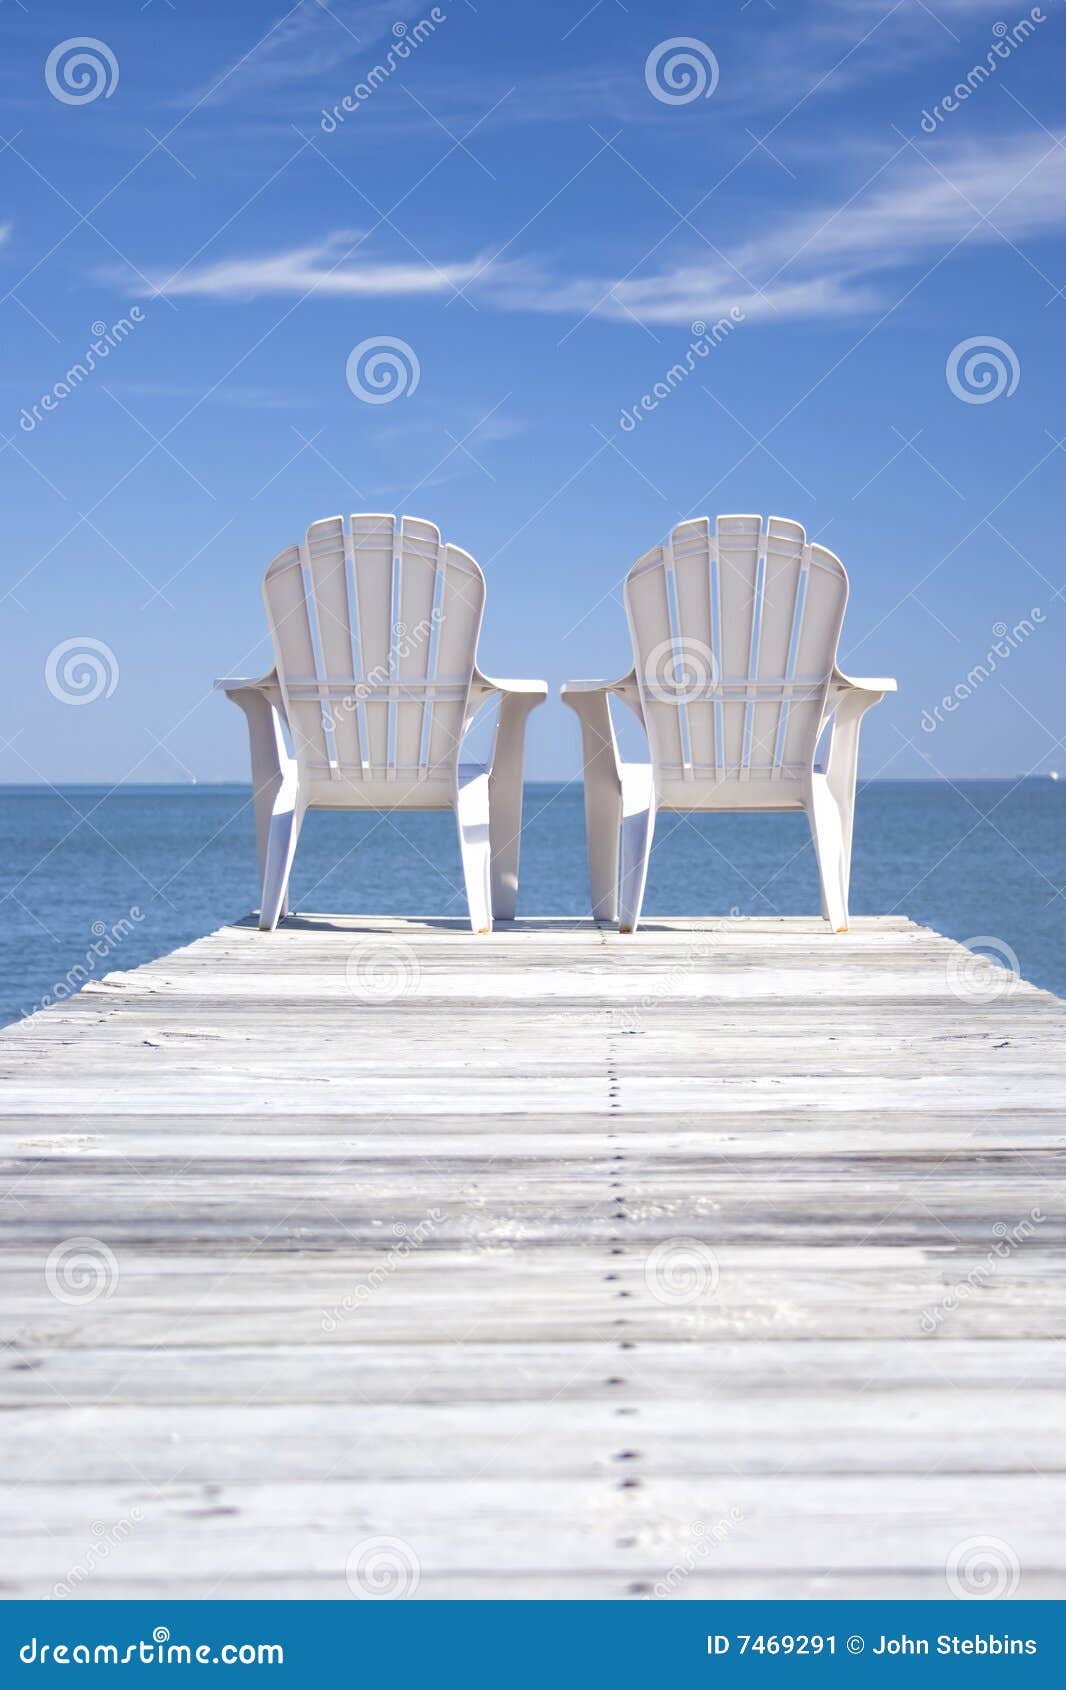 chairs on a dock